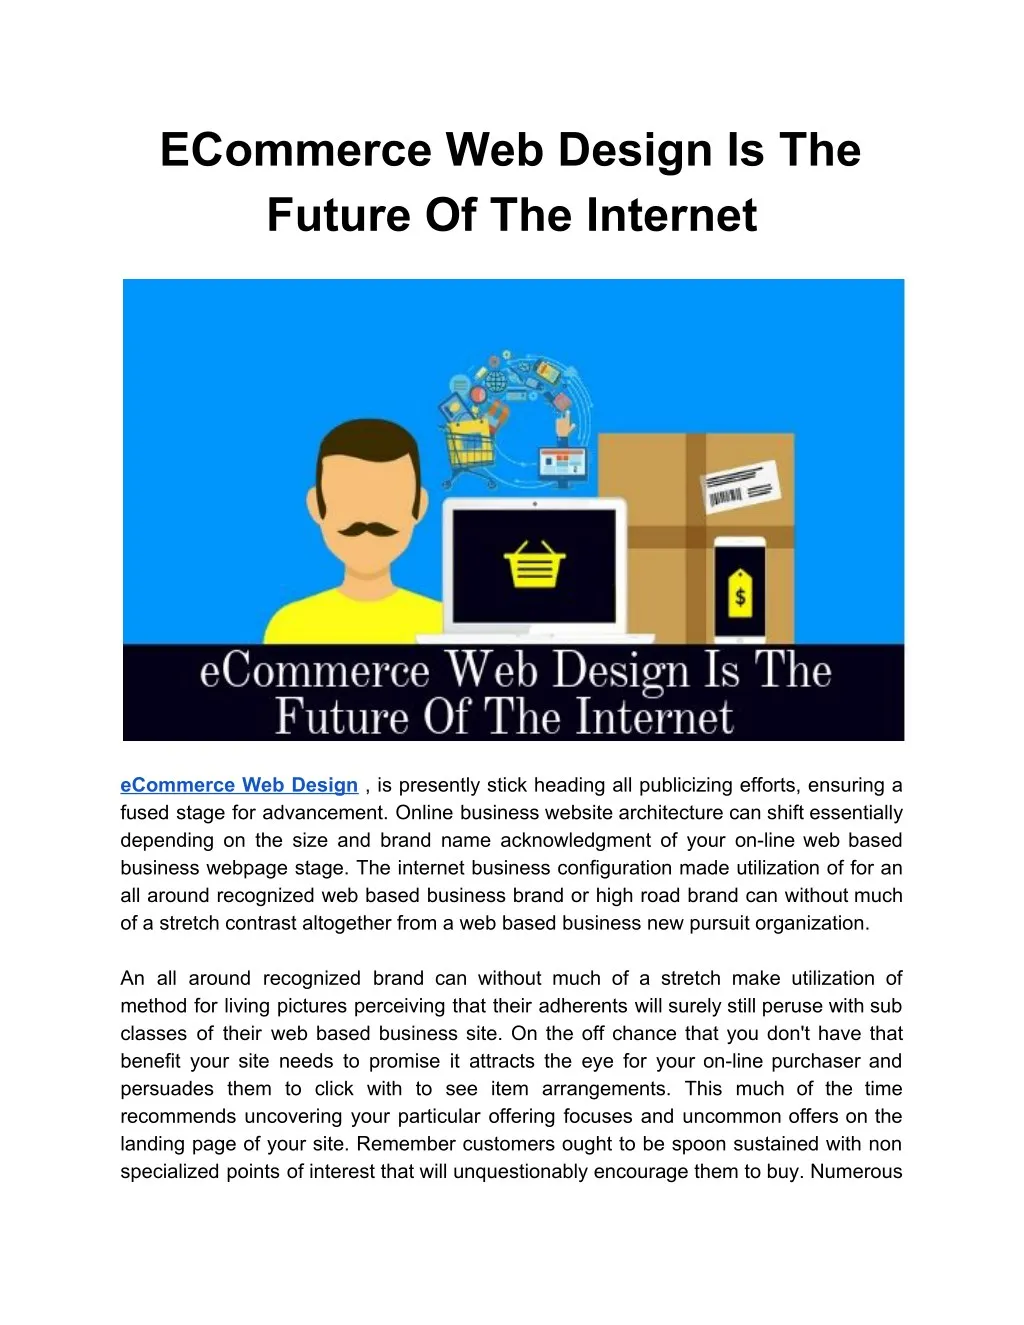 ecommerce web design is the future of the internet